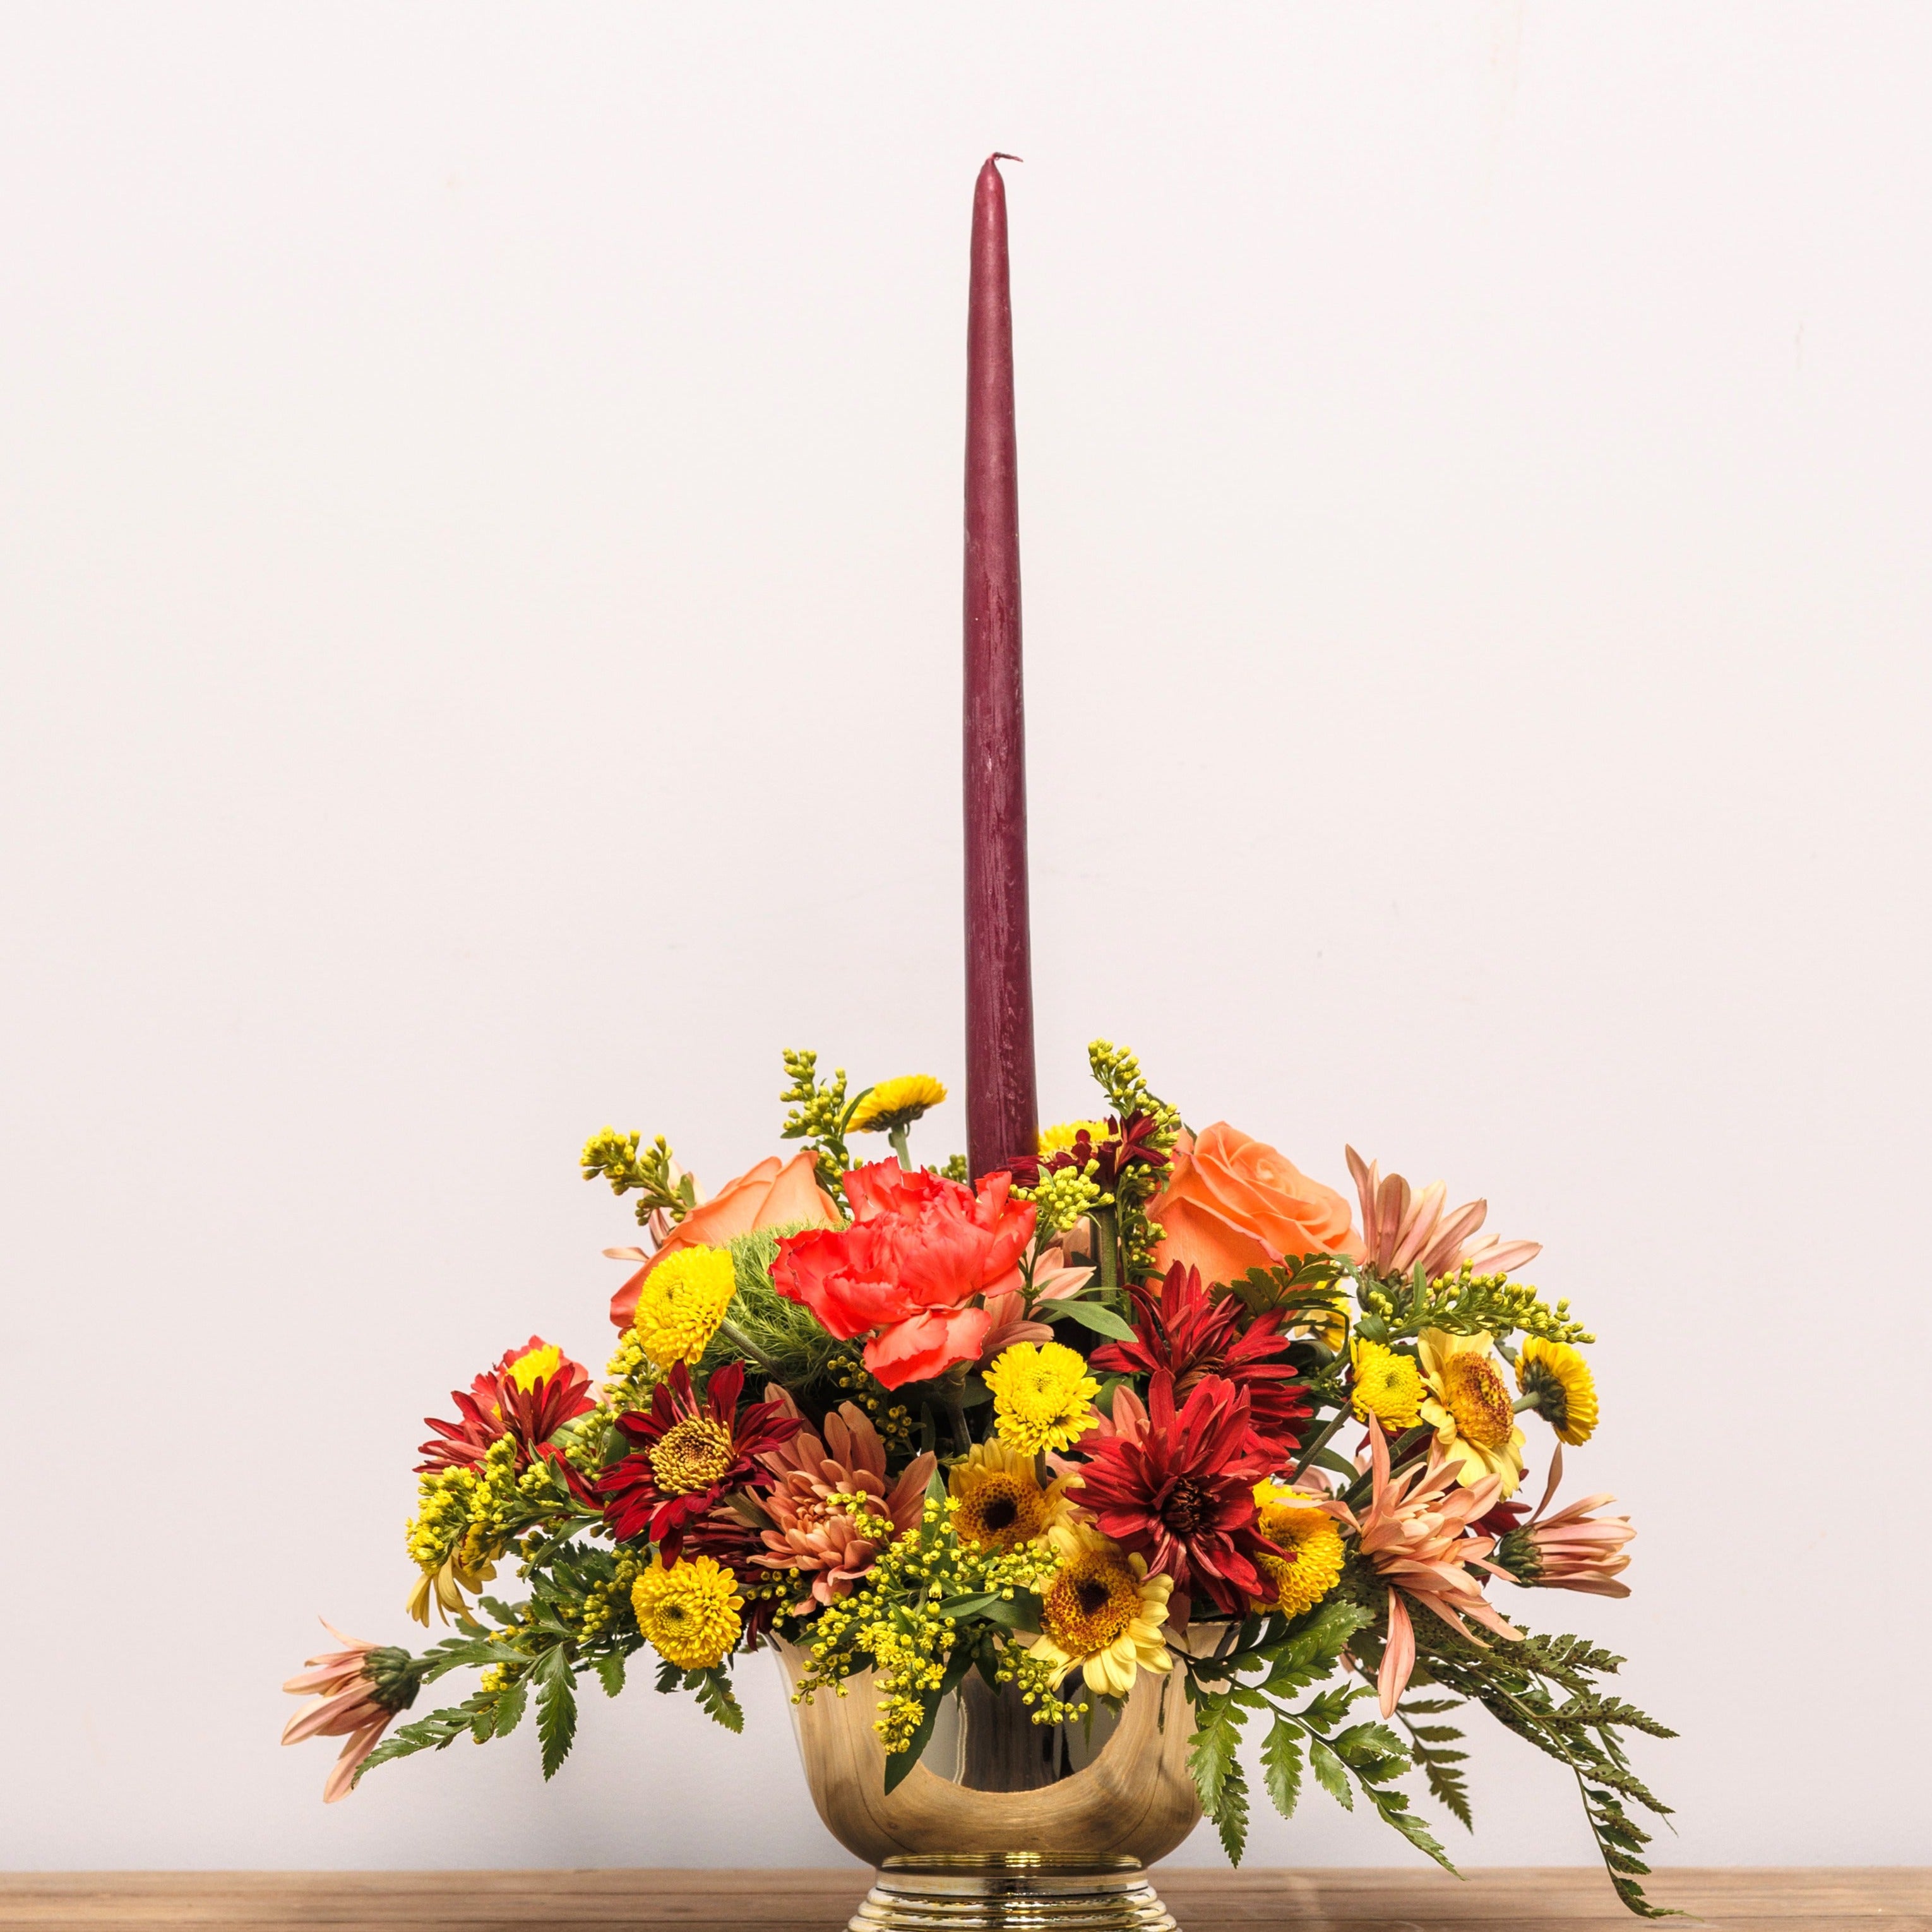 A small fall centerpiece with autumn colors, a taper candle and a golden vase.